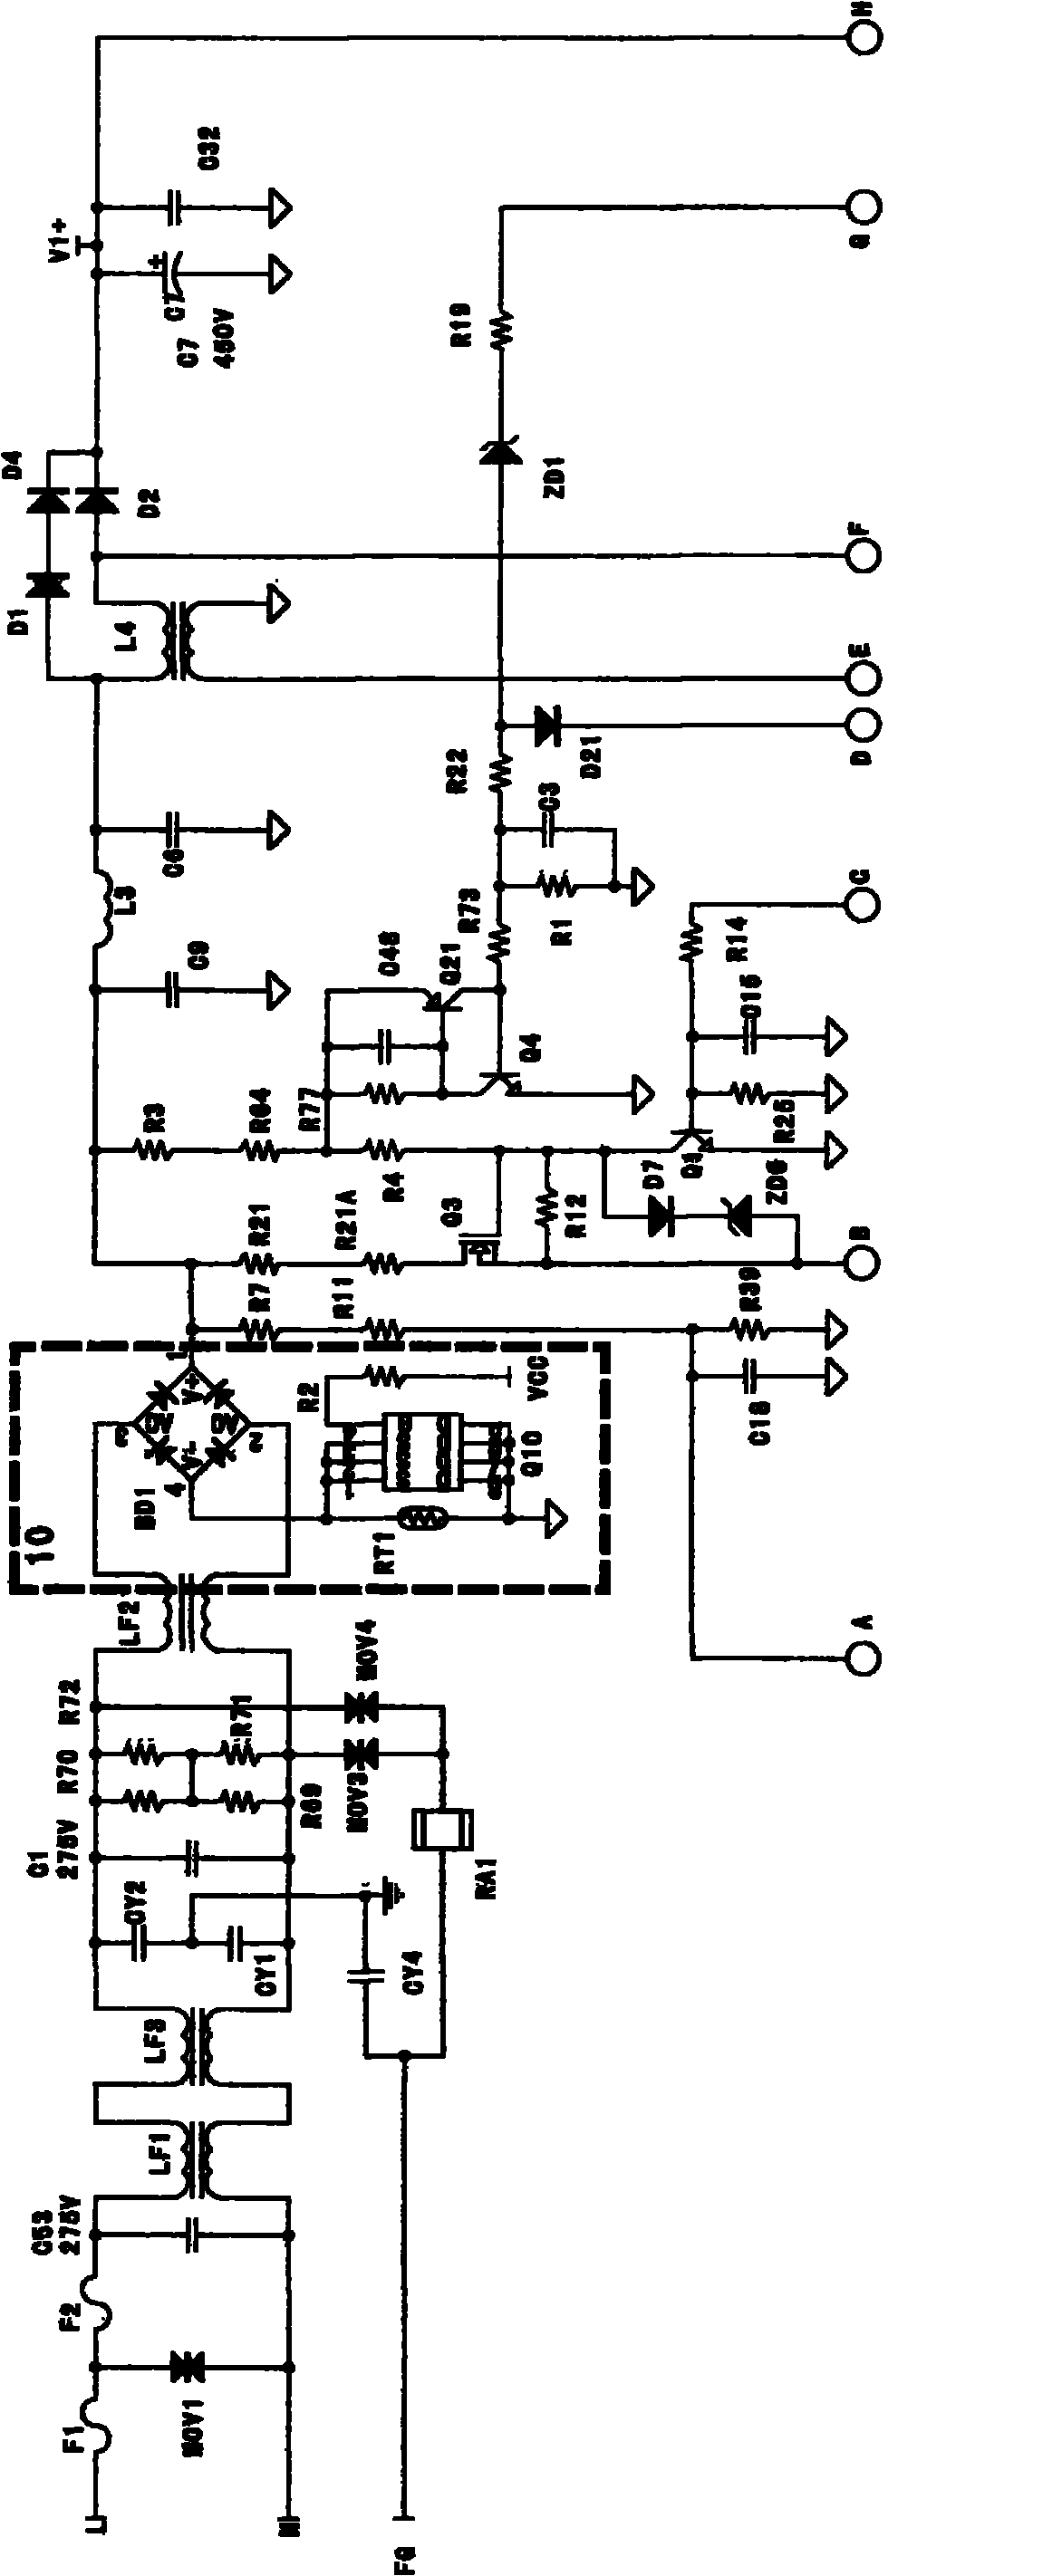 Large-power intelligent dimming multiple-output power supply for suppressing electric surge with field-effect transistor